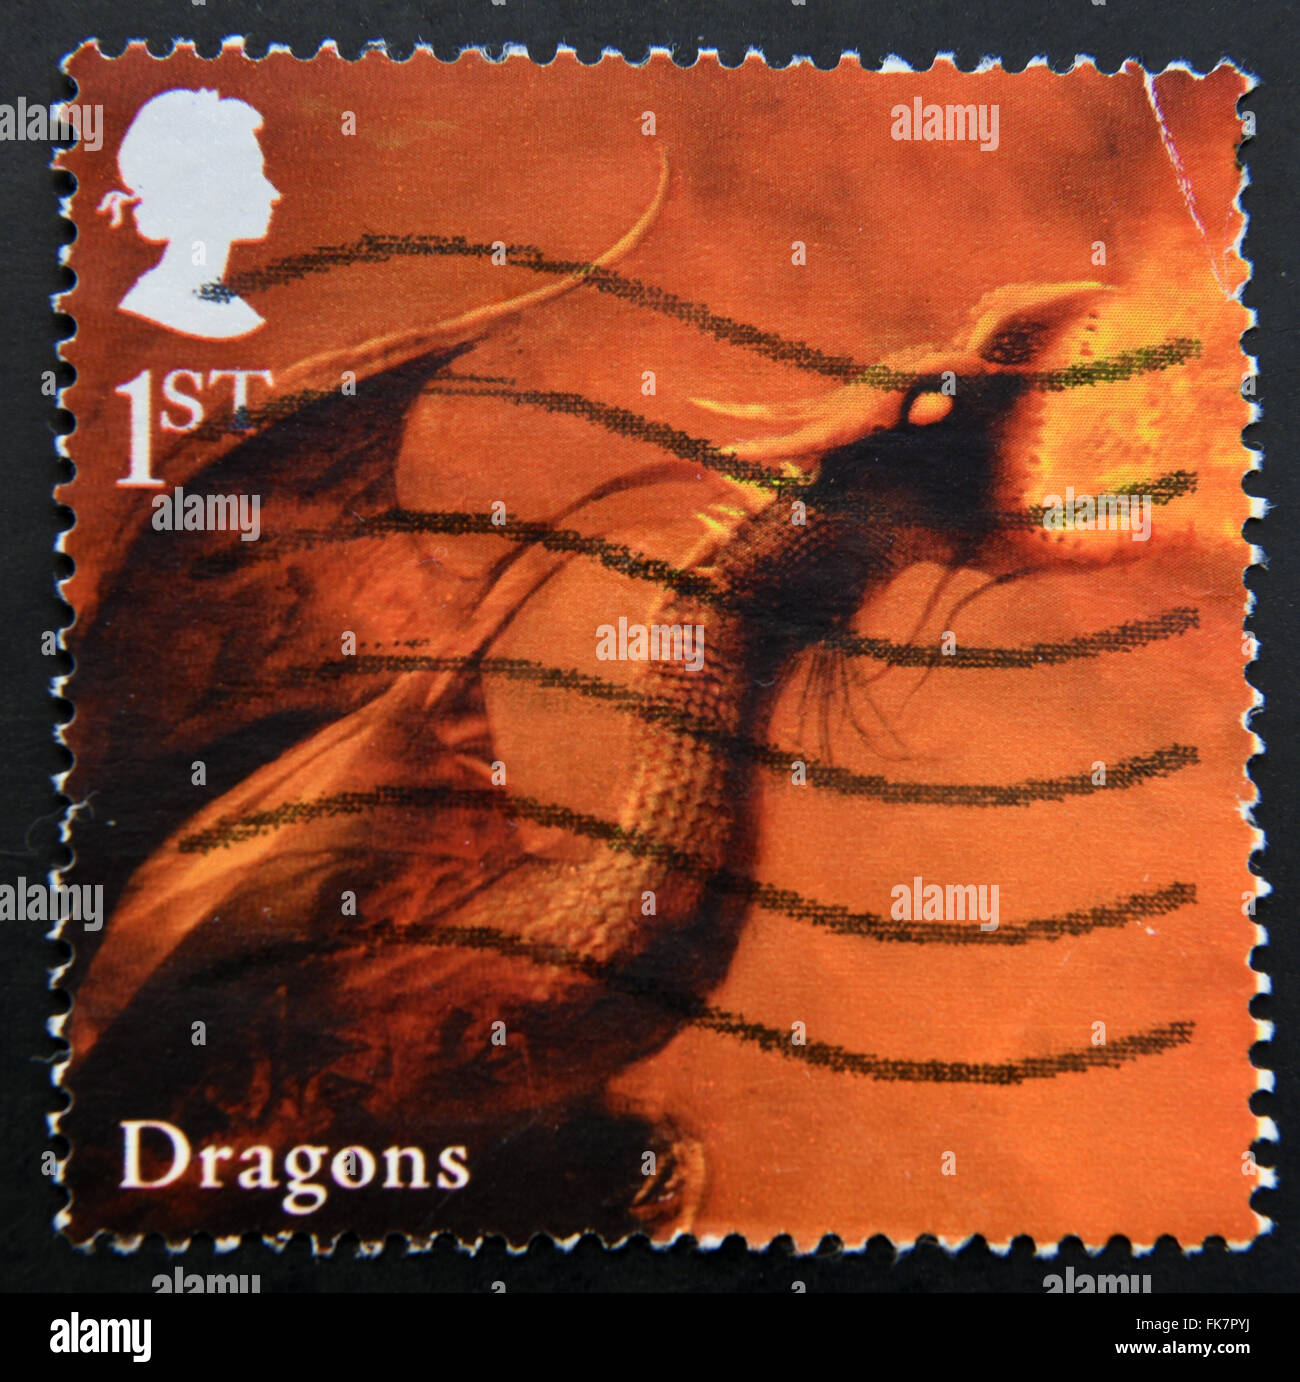 UNITED KINGDOM - CIRCA 2009: A stamp printed in Great Britain dedicated to Mythical Creatures, shows dragon, circa 2009 Stock Photo